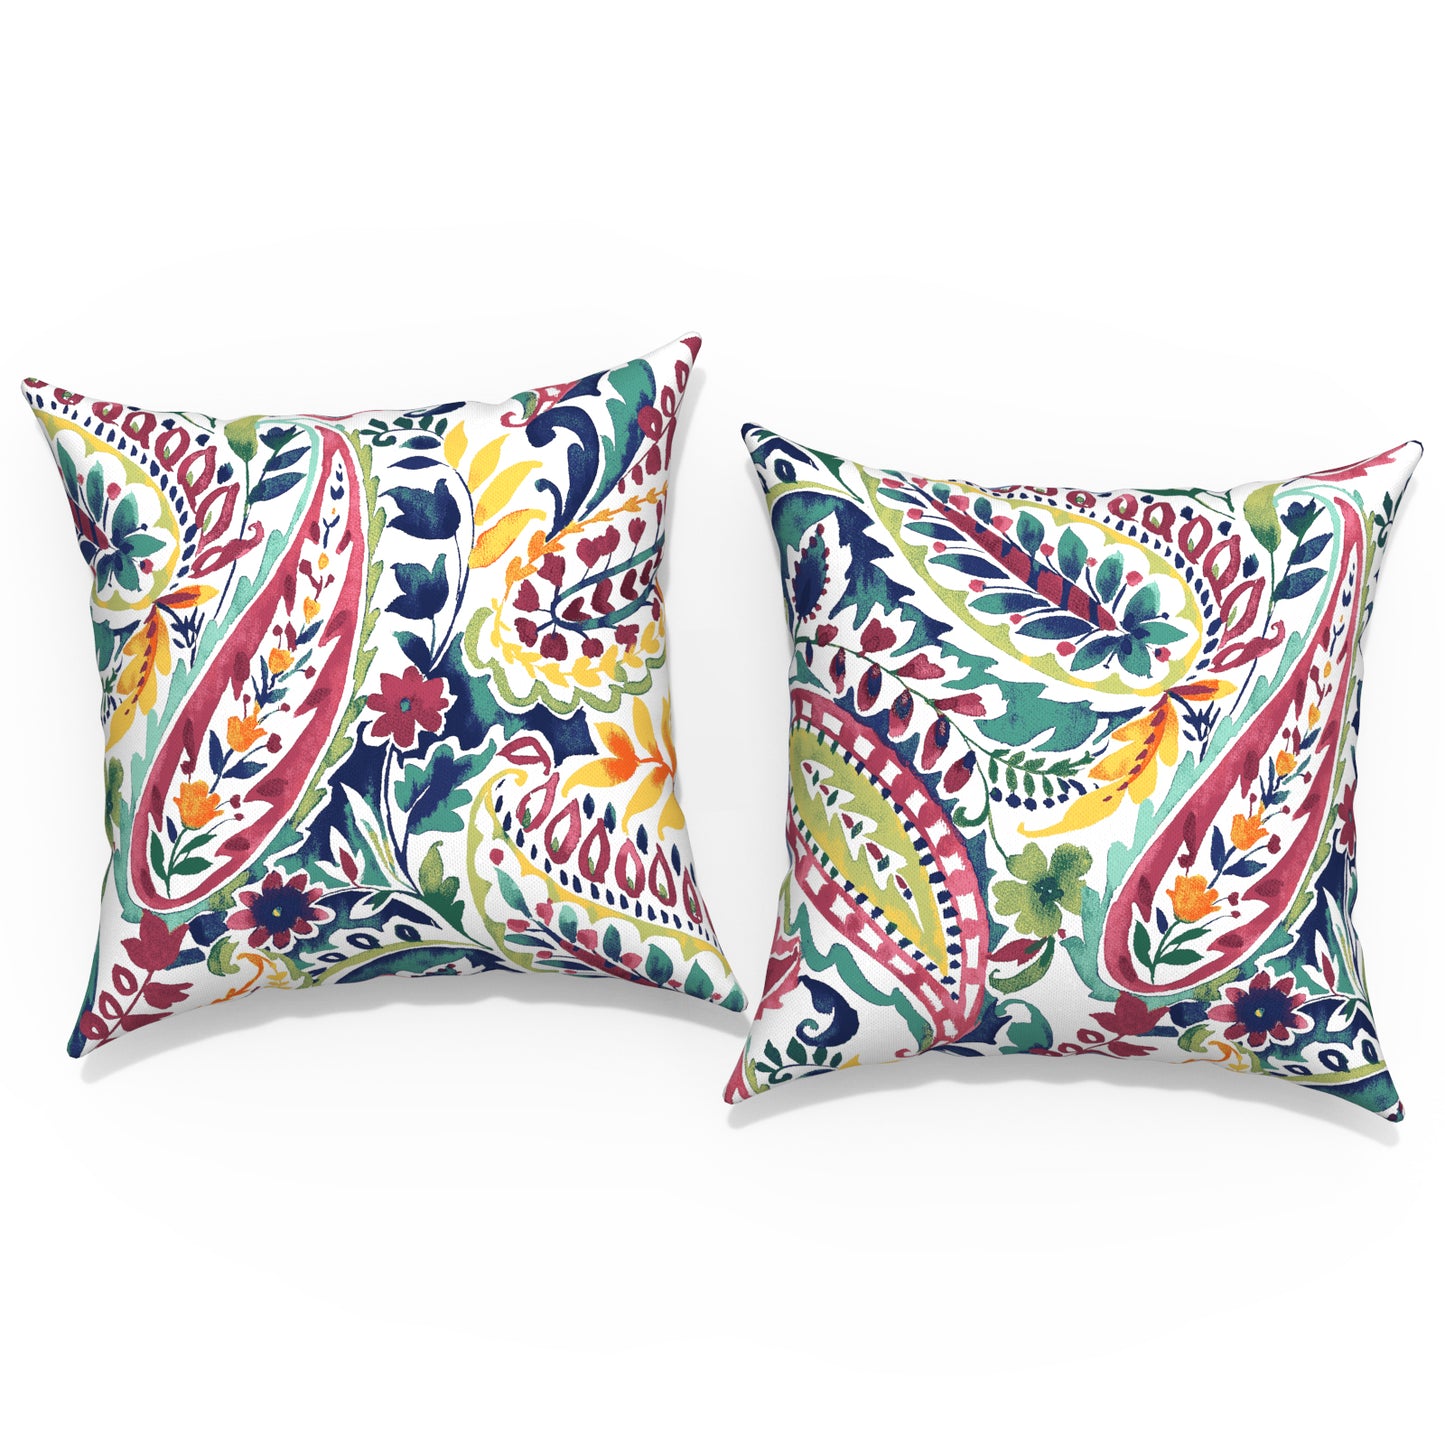 Melody Elephant Outdoor Throw Pillows 16x16 Inch, water Repellent patio pillows with Inners set of 2, outdoor pillows for patio furniture home garden, Vigour Paisley